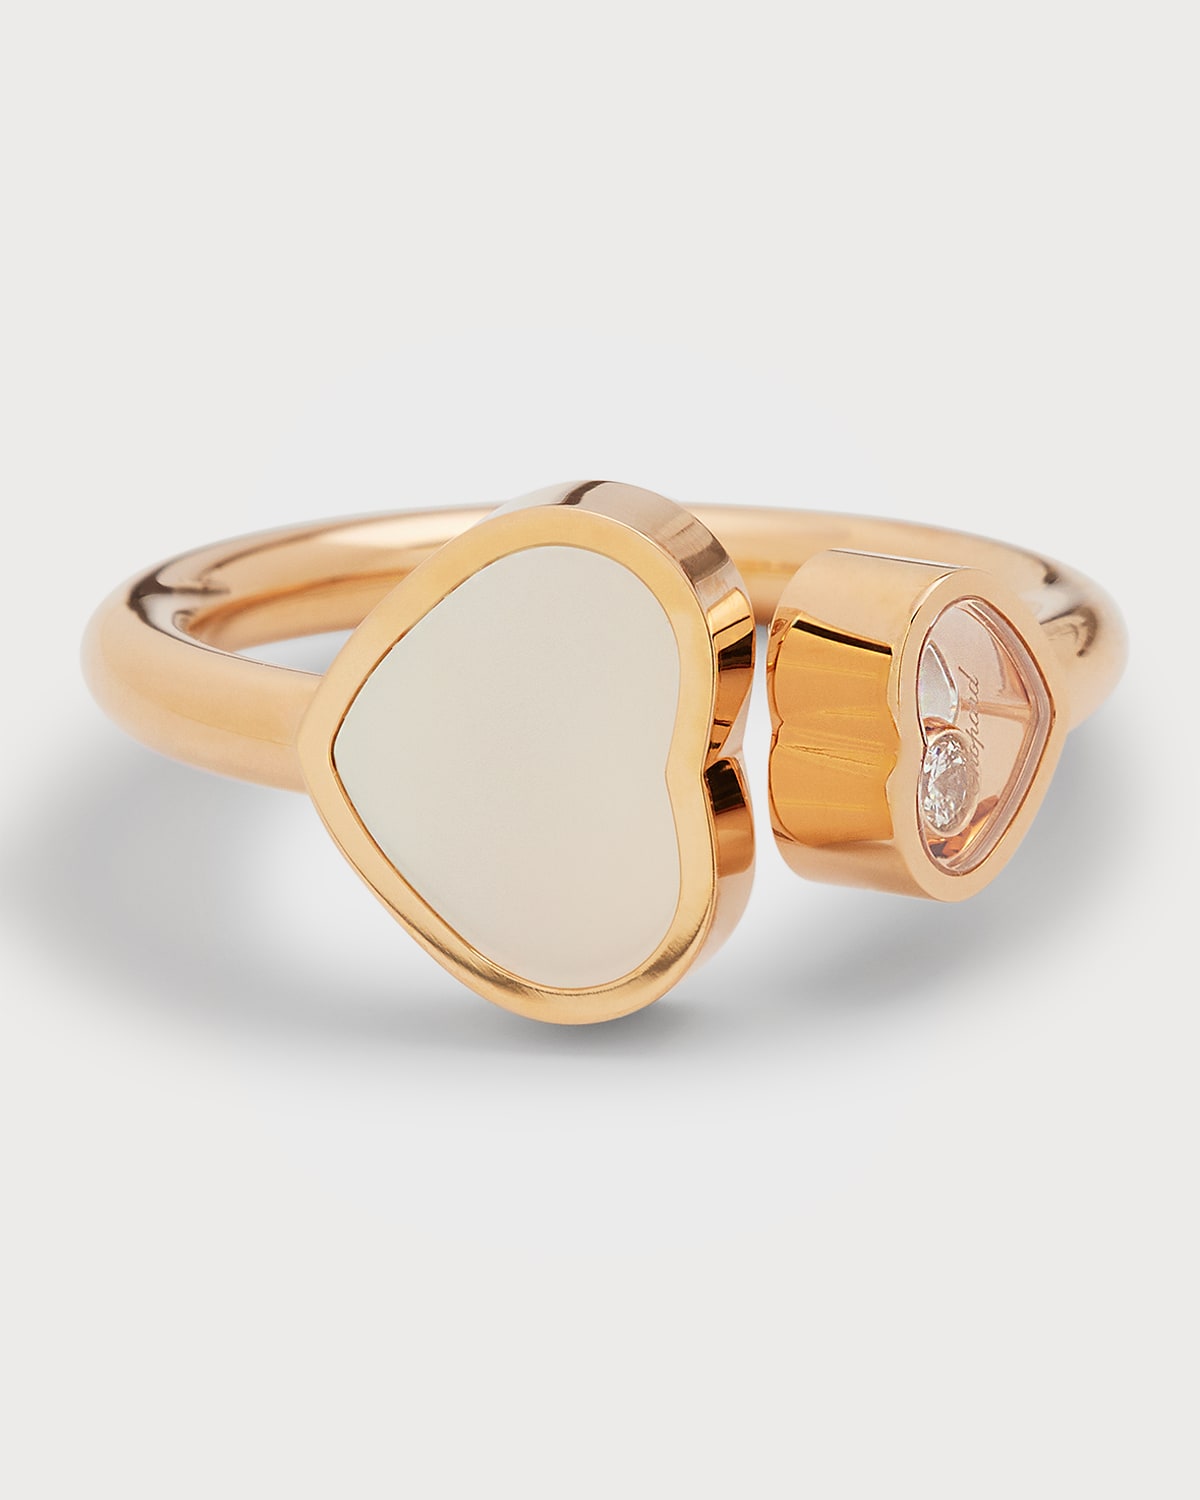 Chopard Happy Hearts Mother-of-Pearl & Diamond Ring in 18K Rose Gold, Size 52/53